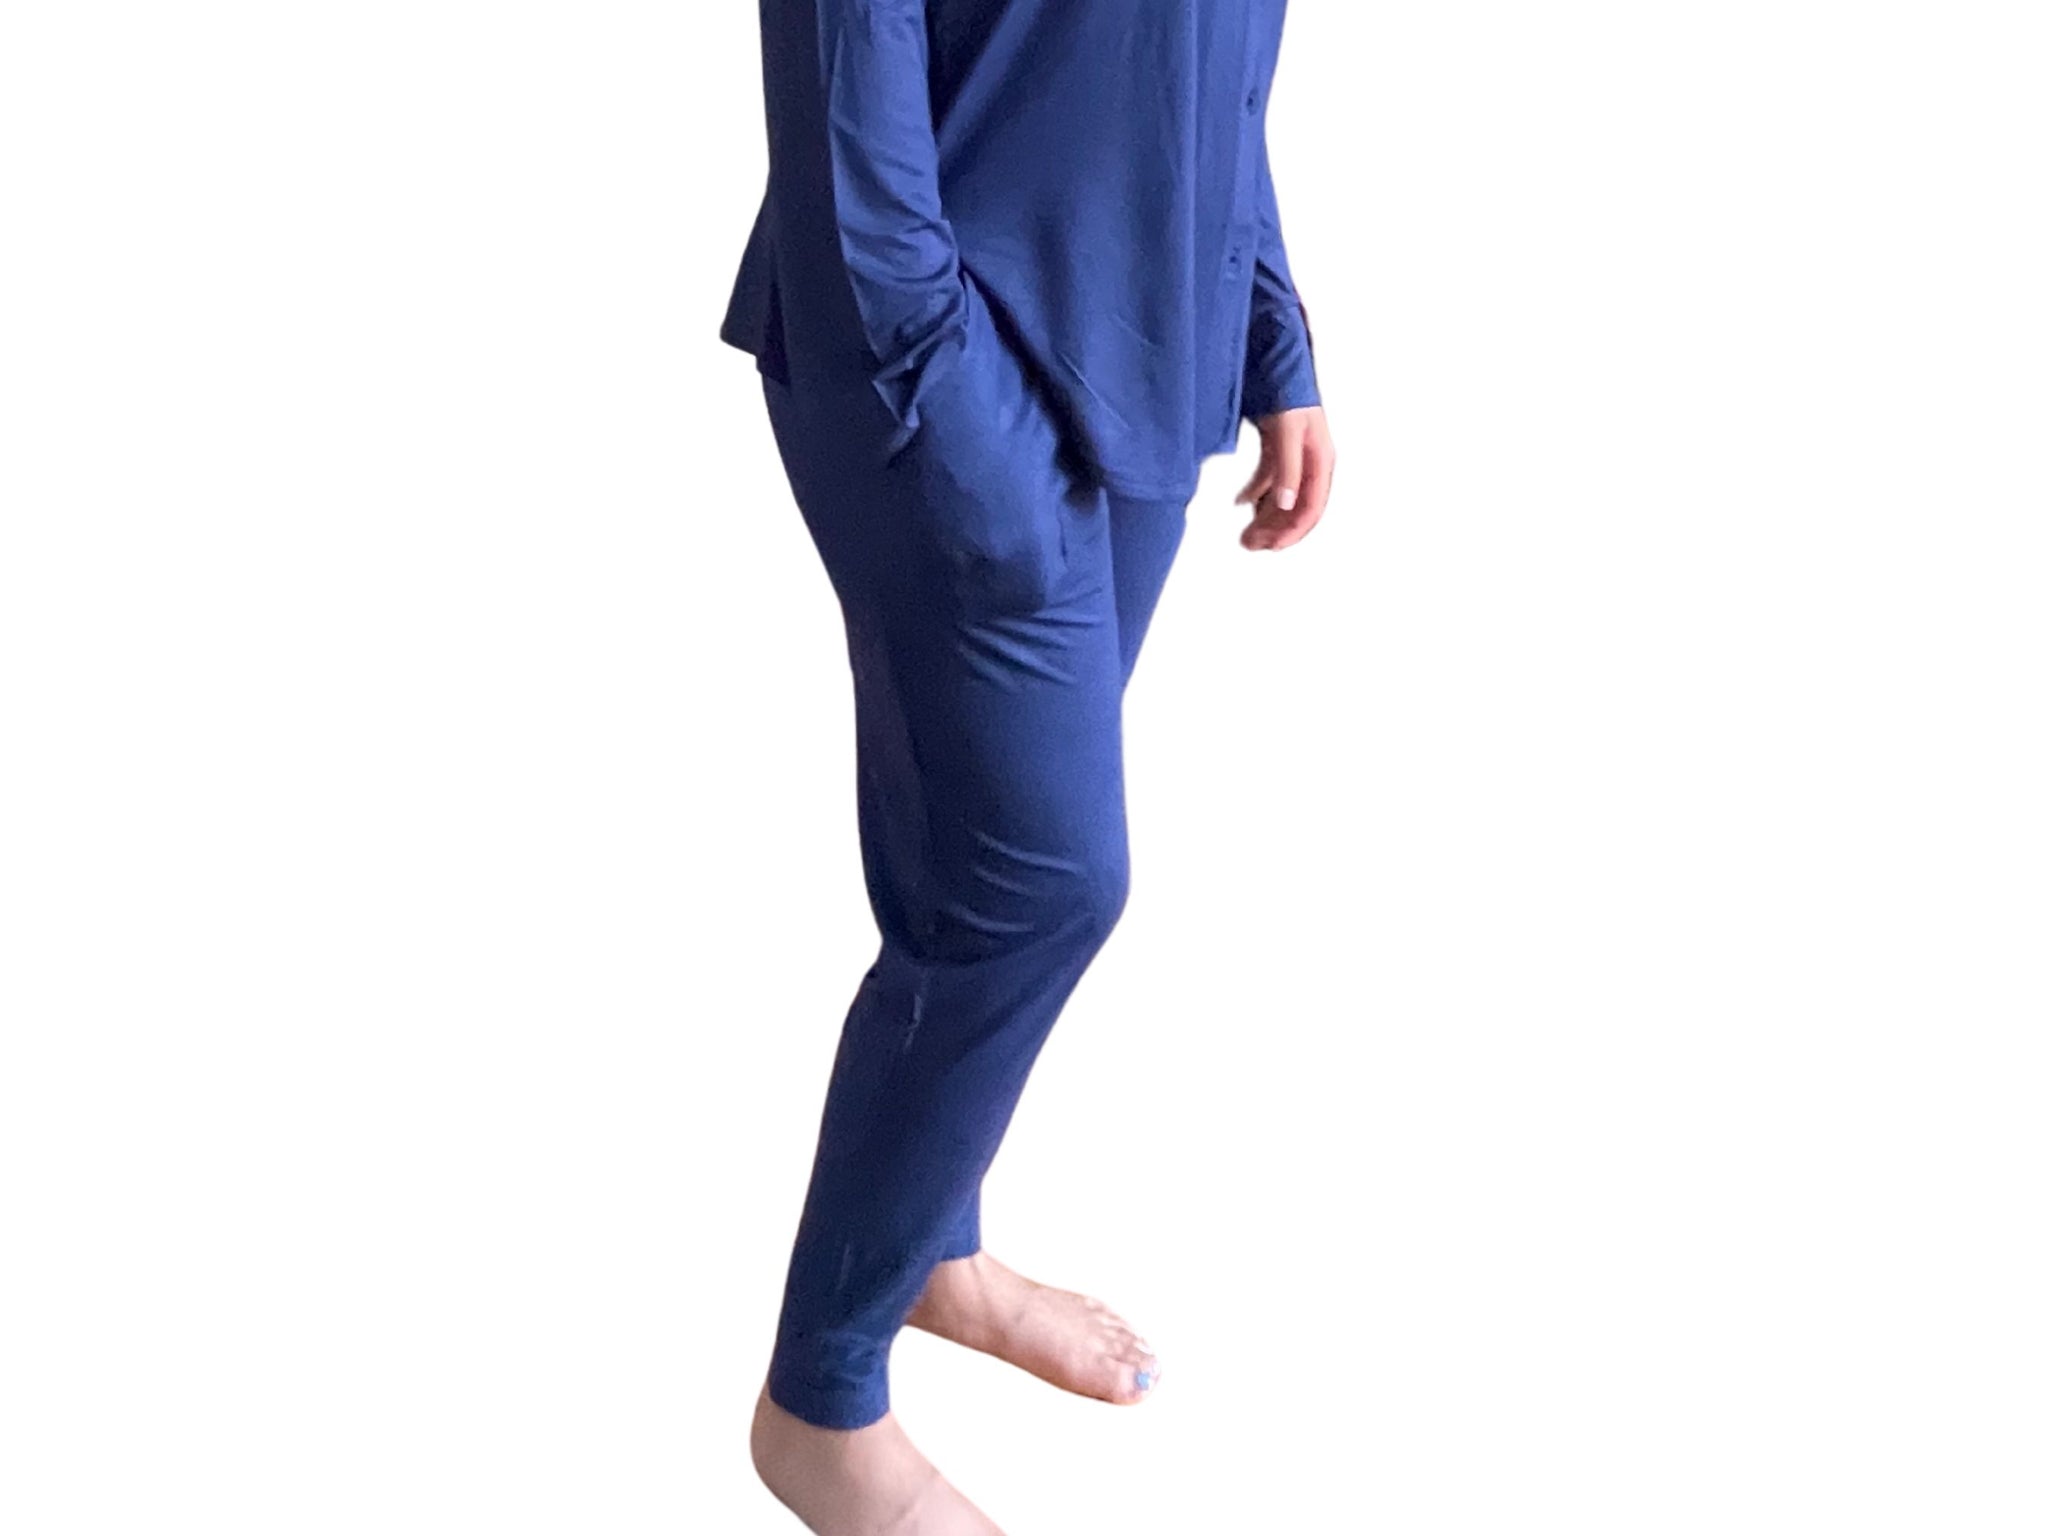 Women's Bamboo Pajama Bottoms side image. variant:: richest blue